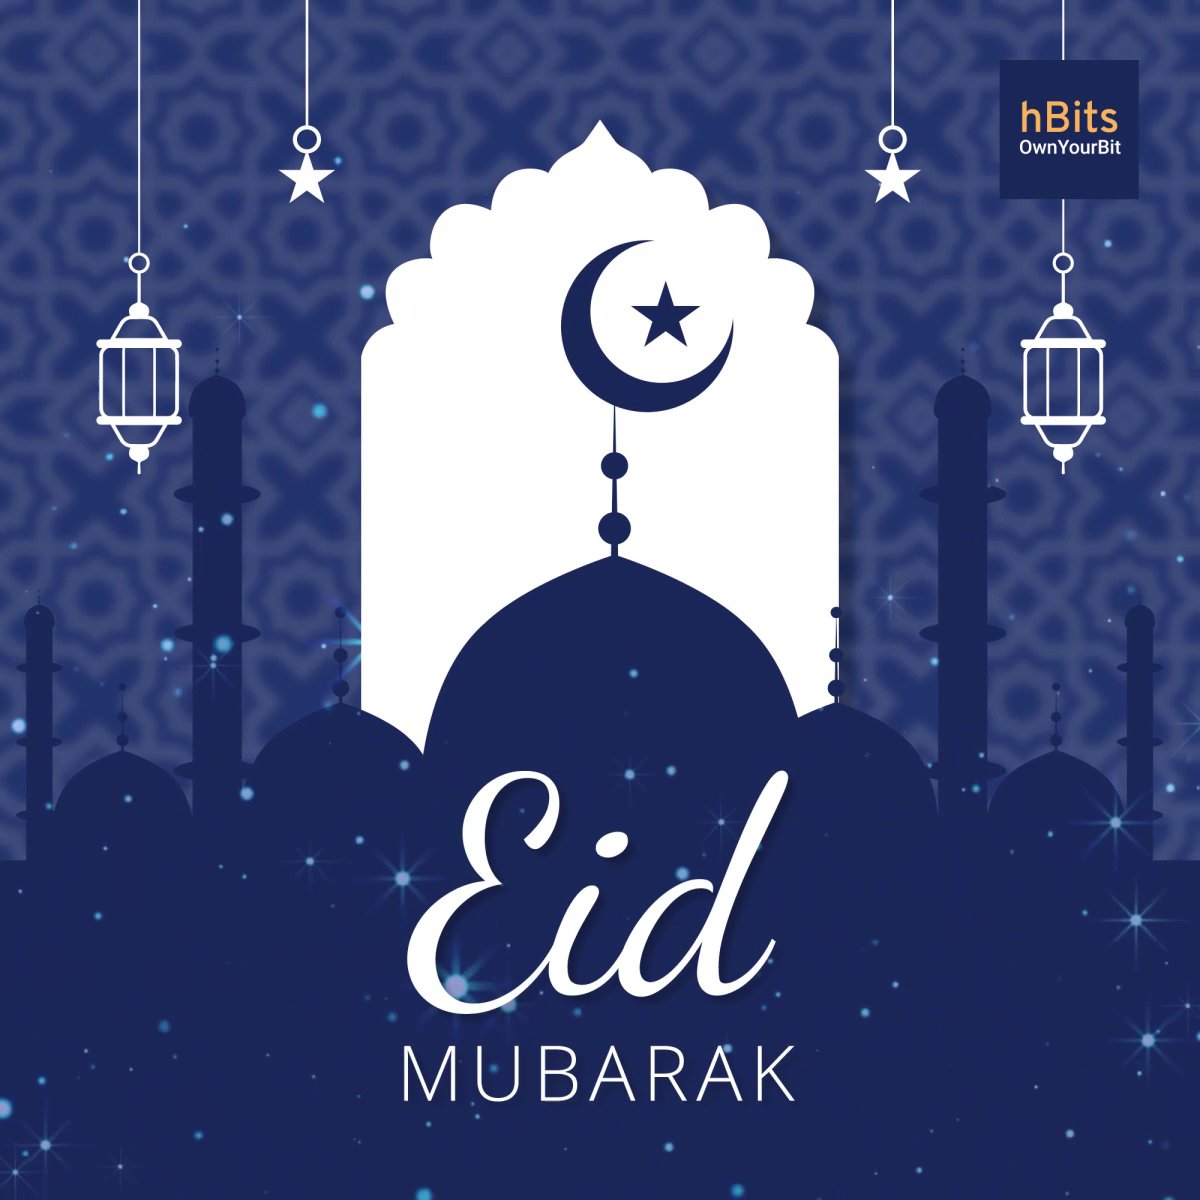 Eid Mubarak!🌙🫂 May your year be as bright as your smile and as sweet as your desserts.✨ #hBits #ownyourbit #Prosperity #eidmubarak #happiness #FestivalSeason